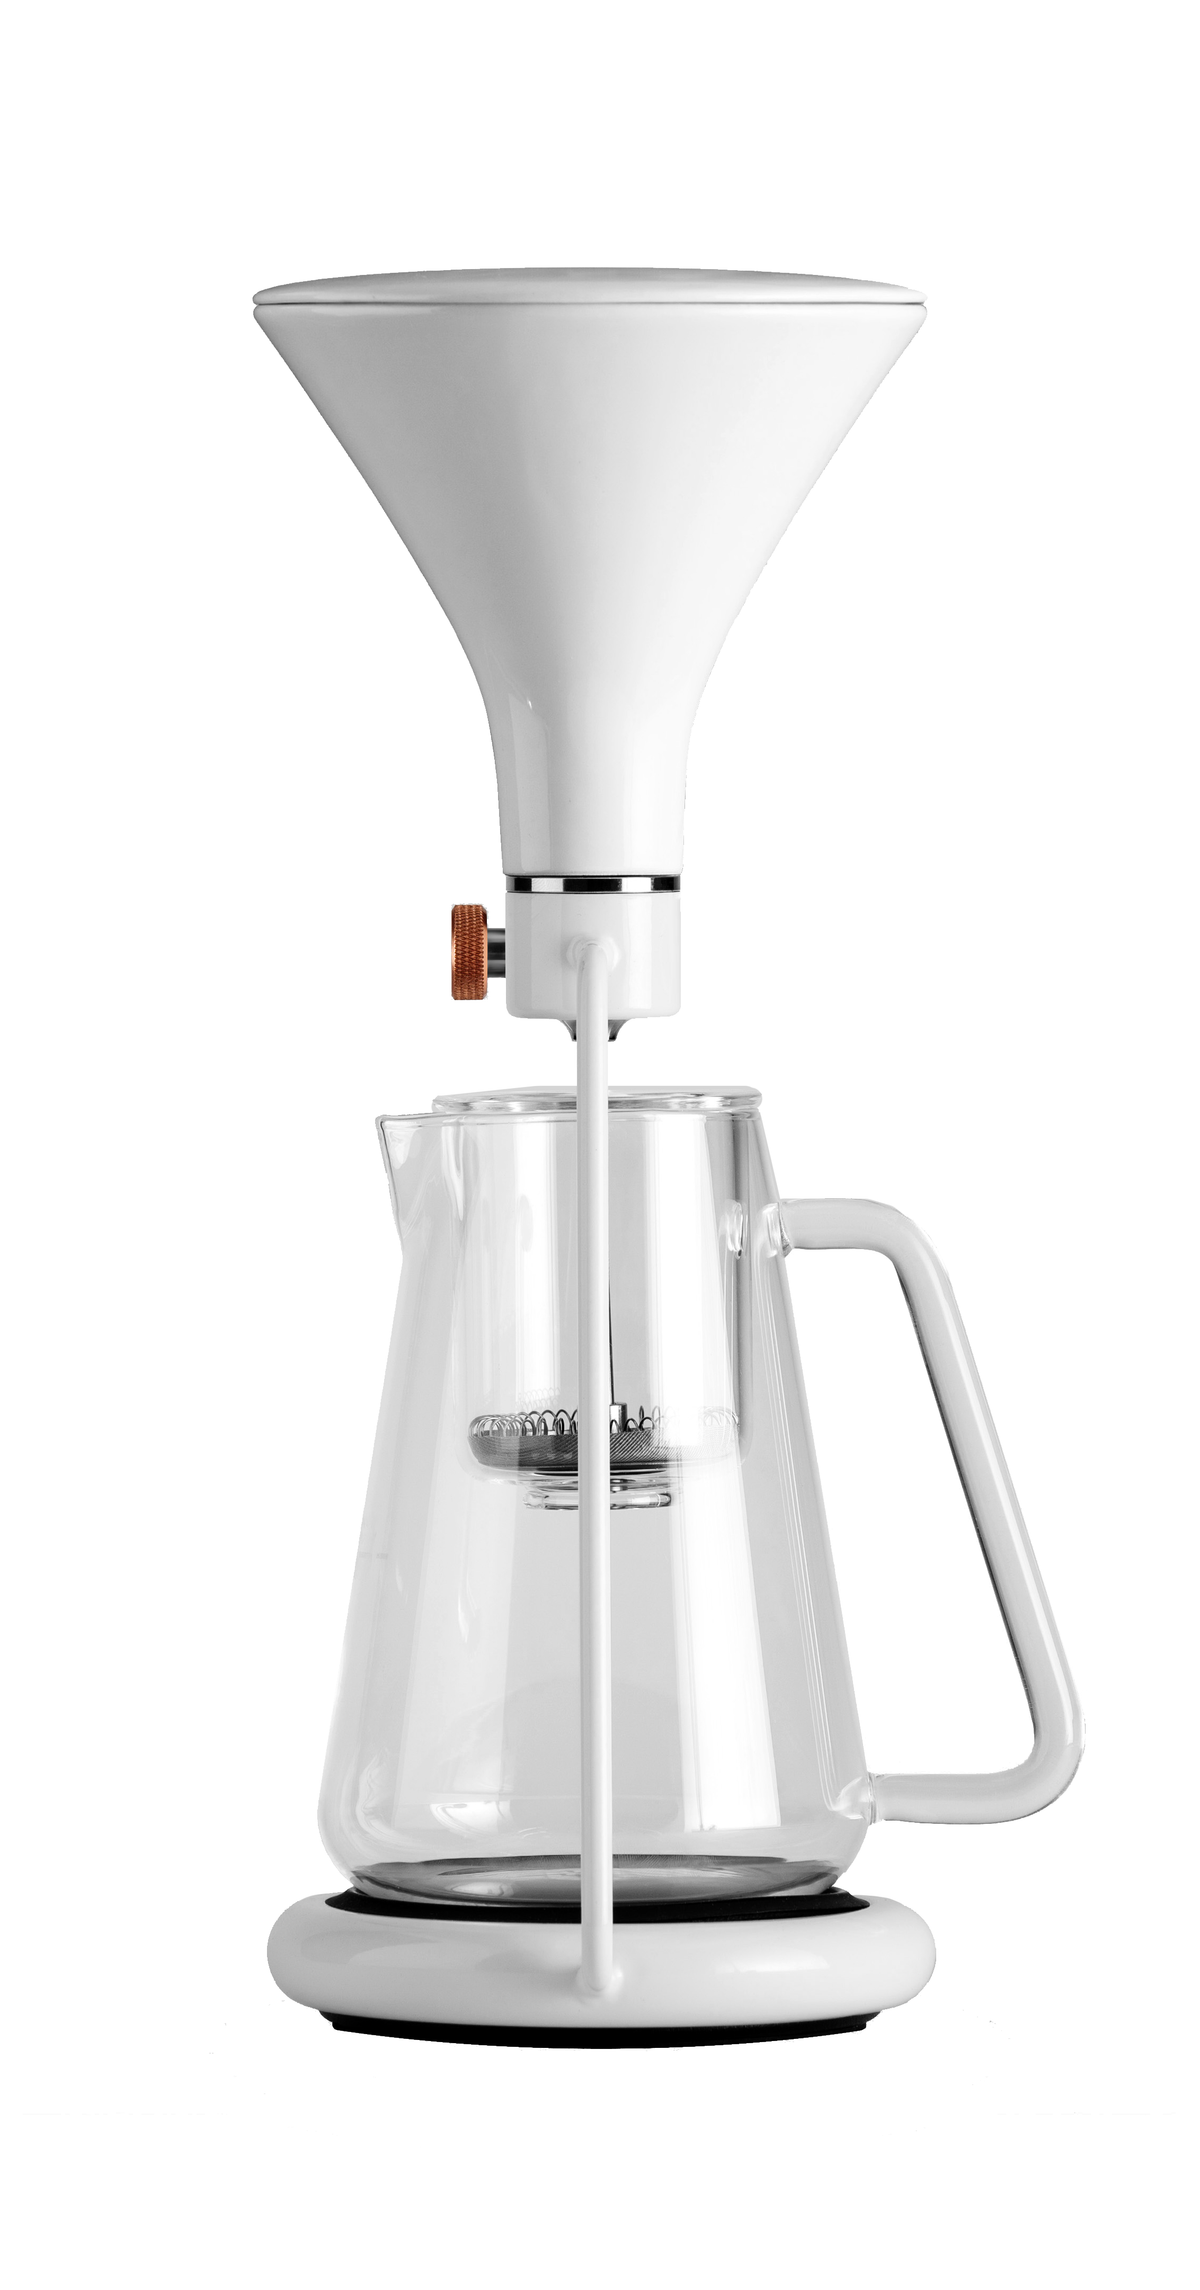 Goat Story GINA Smart Coffee Maker in White – Whole Latte Love